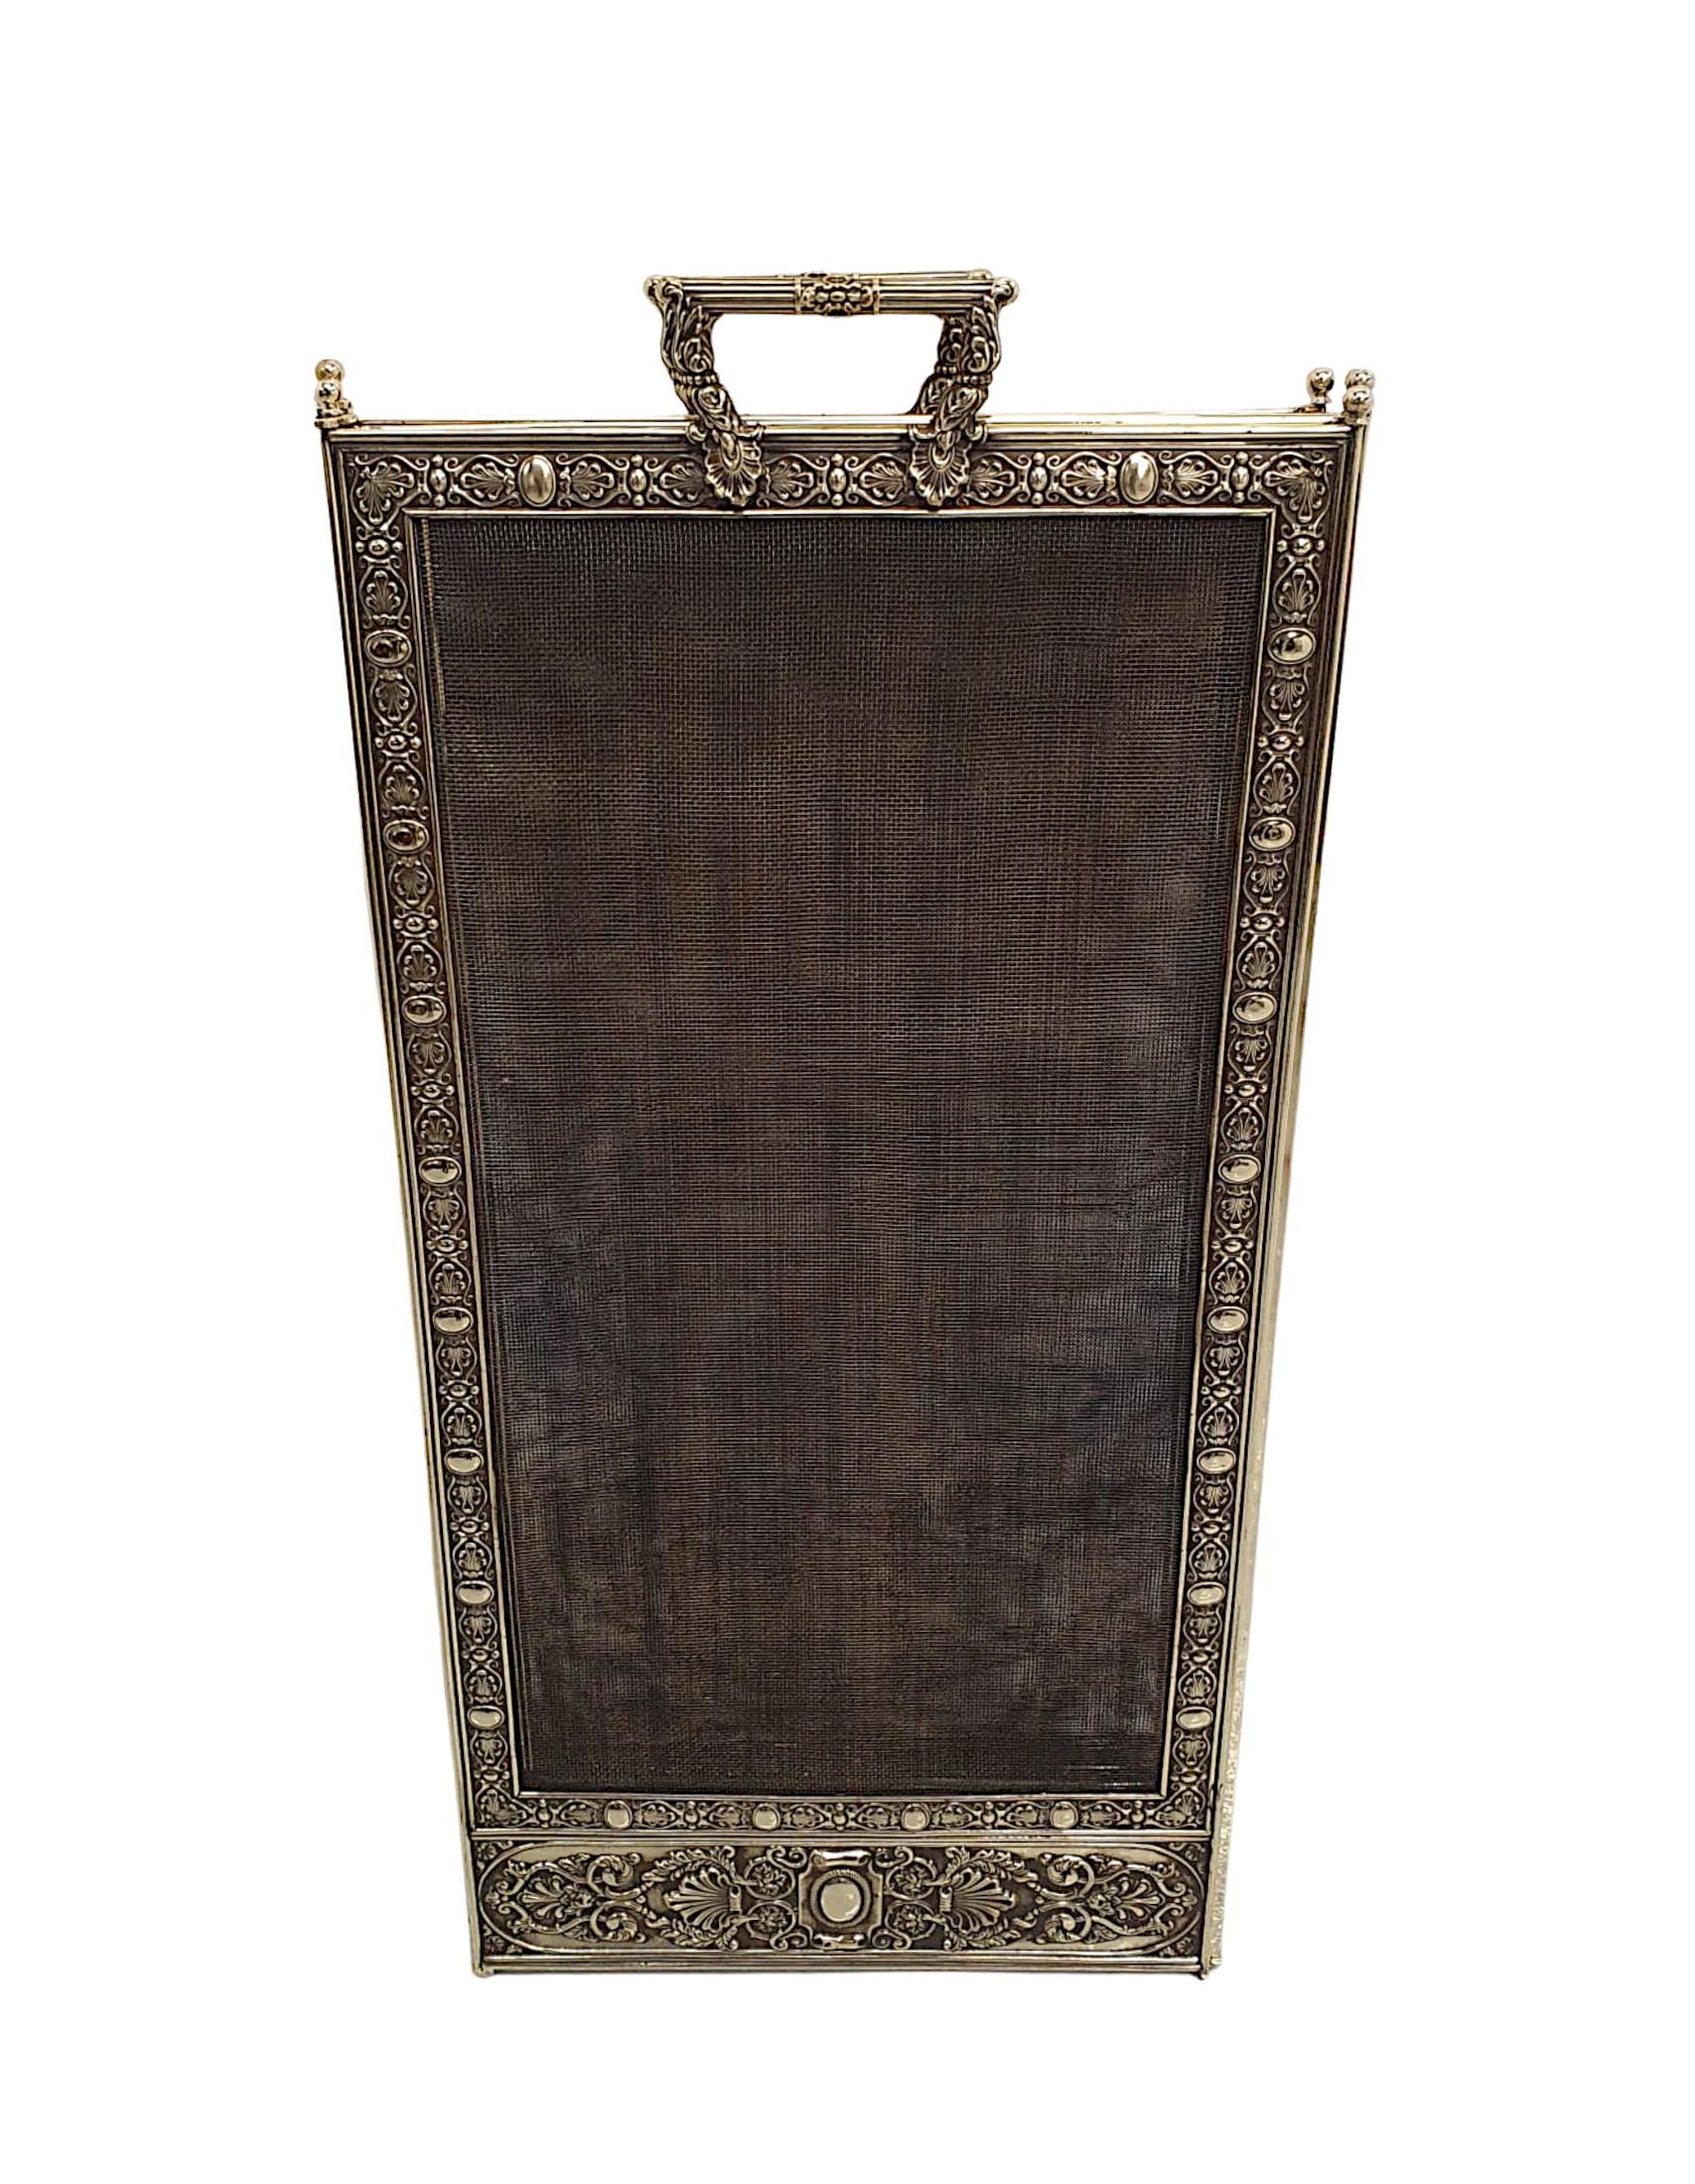 A very rare 19th Century finely cast polished brass four panel folding fire screen of large proportions, fully restored and of exceptional quality.  The protective wire mesh of rectangular form is set within four beautifully ornate, reeded polished